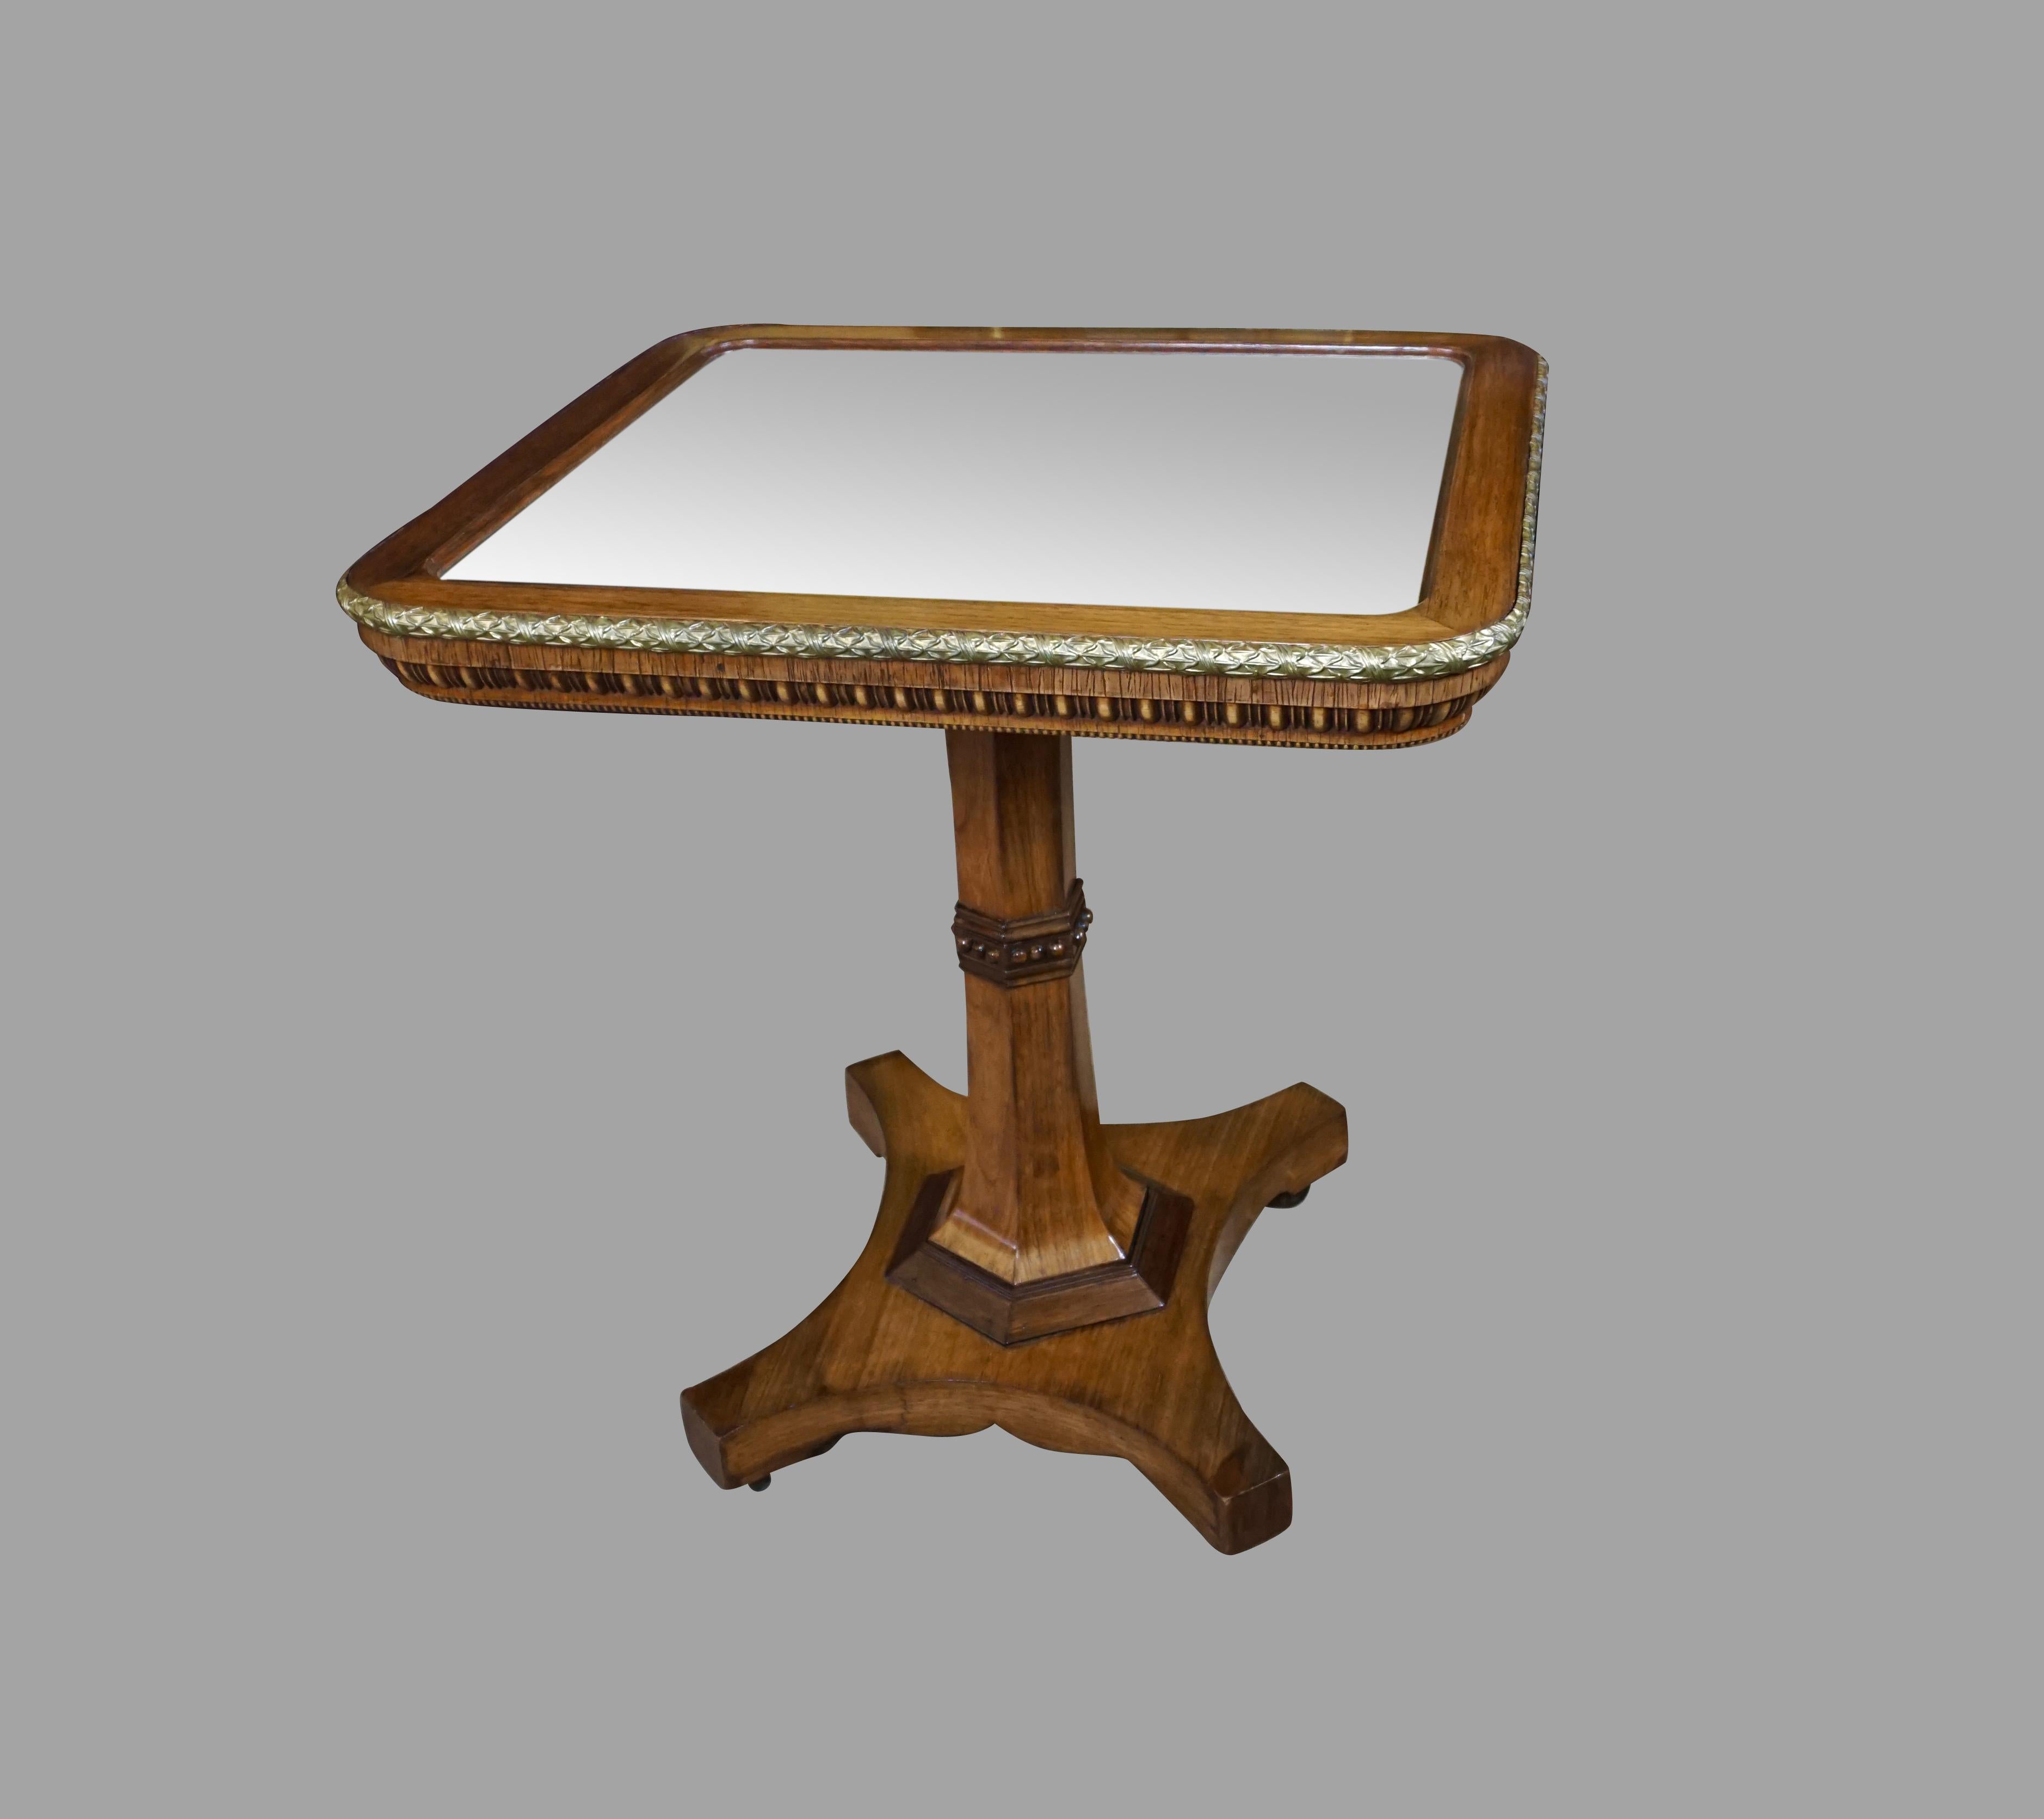 English Regency Gilt Metal Mounted Tilt-Top Mirrored Occasional Table For Sale